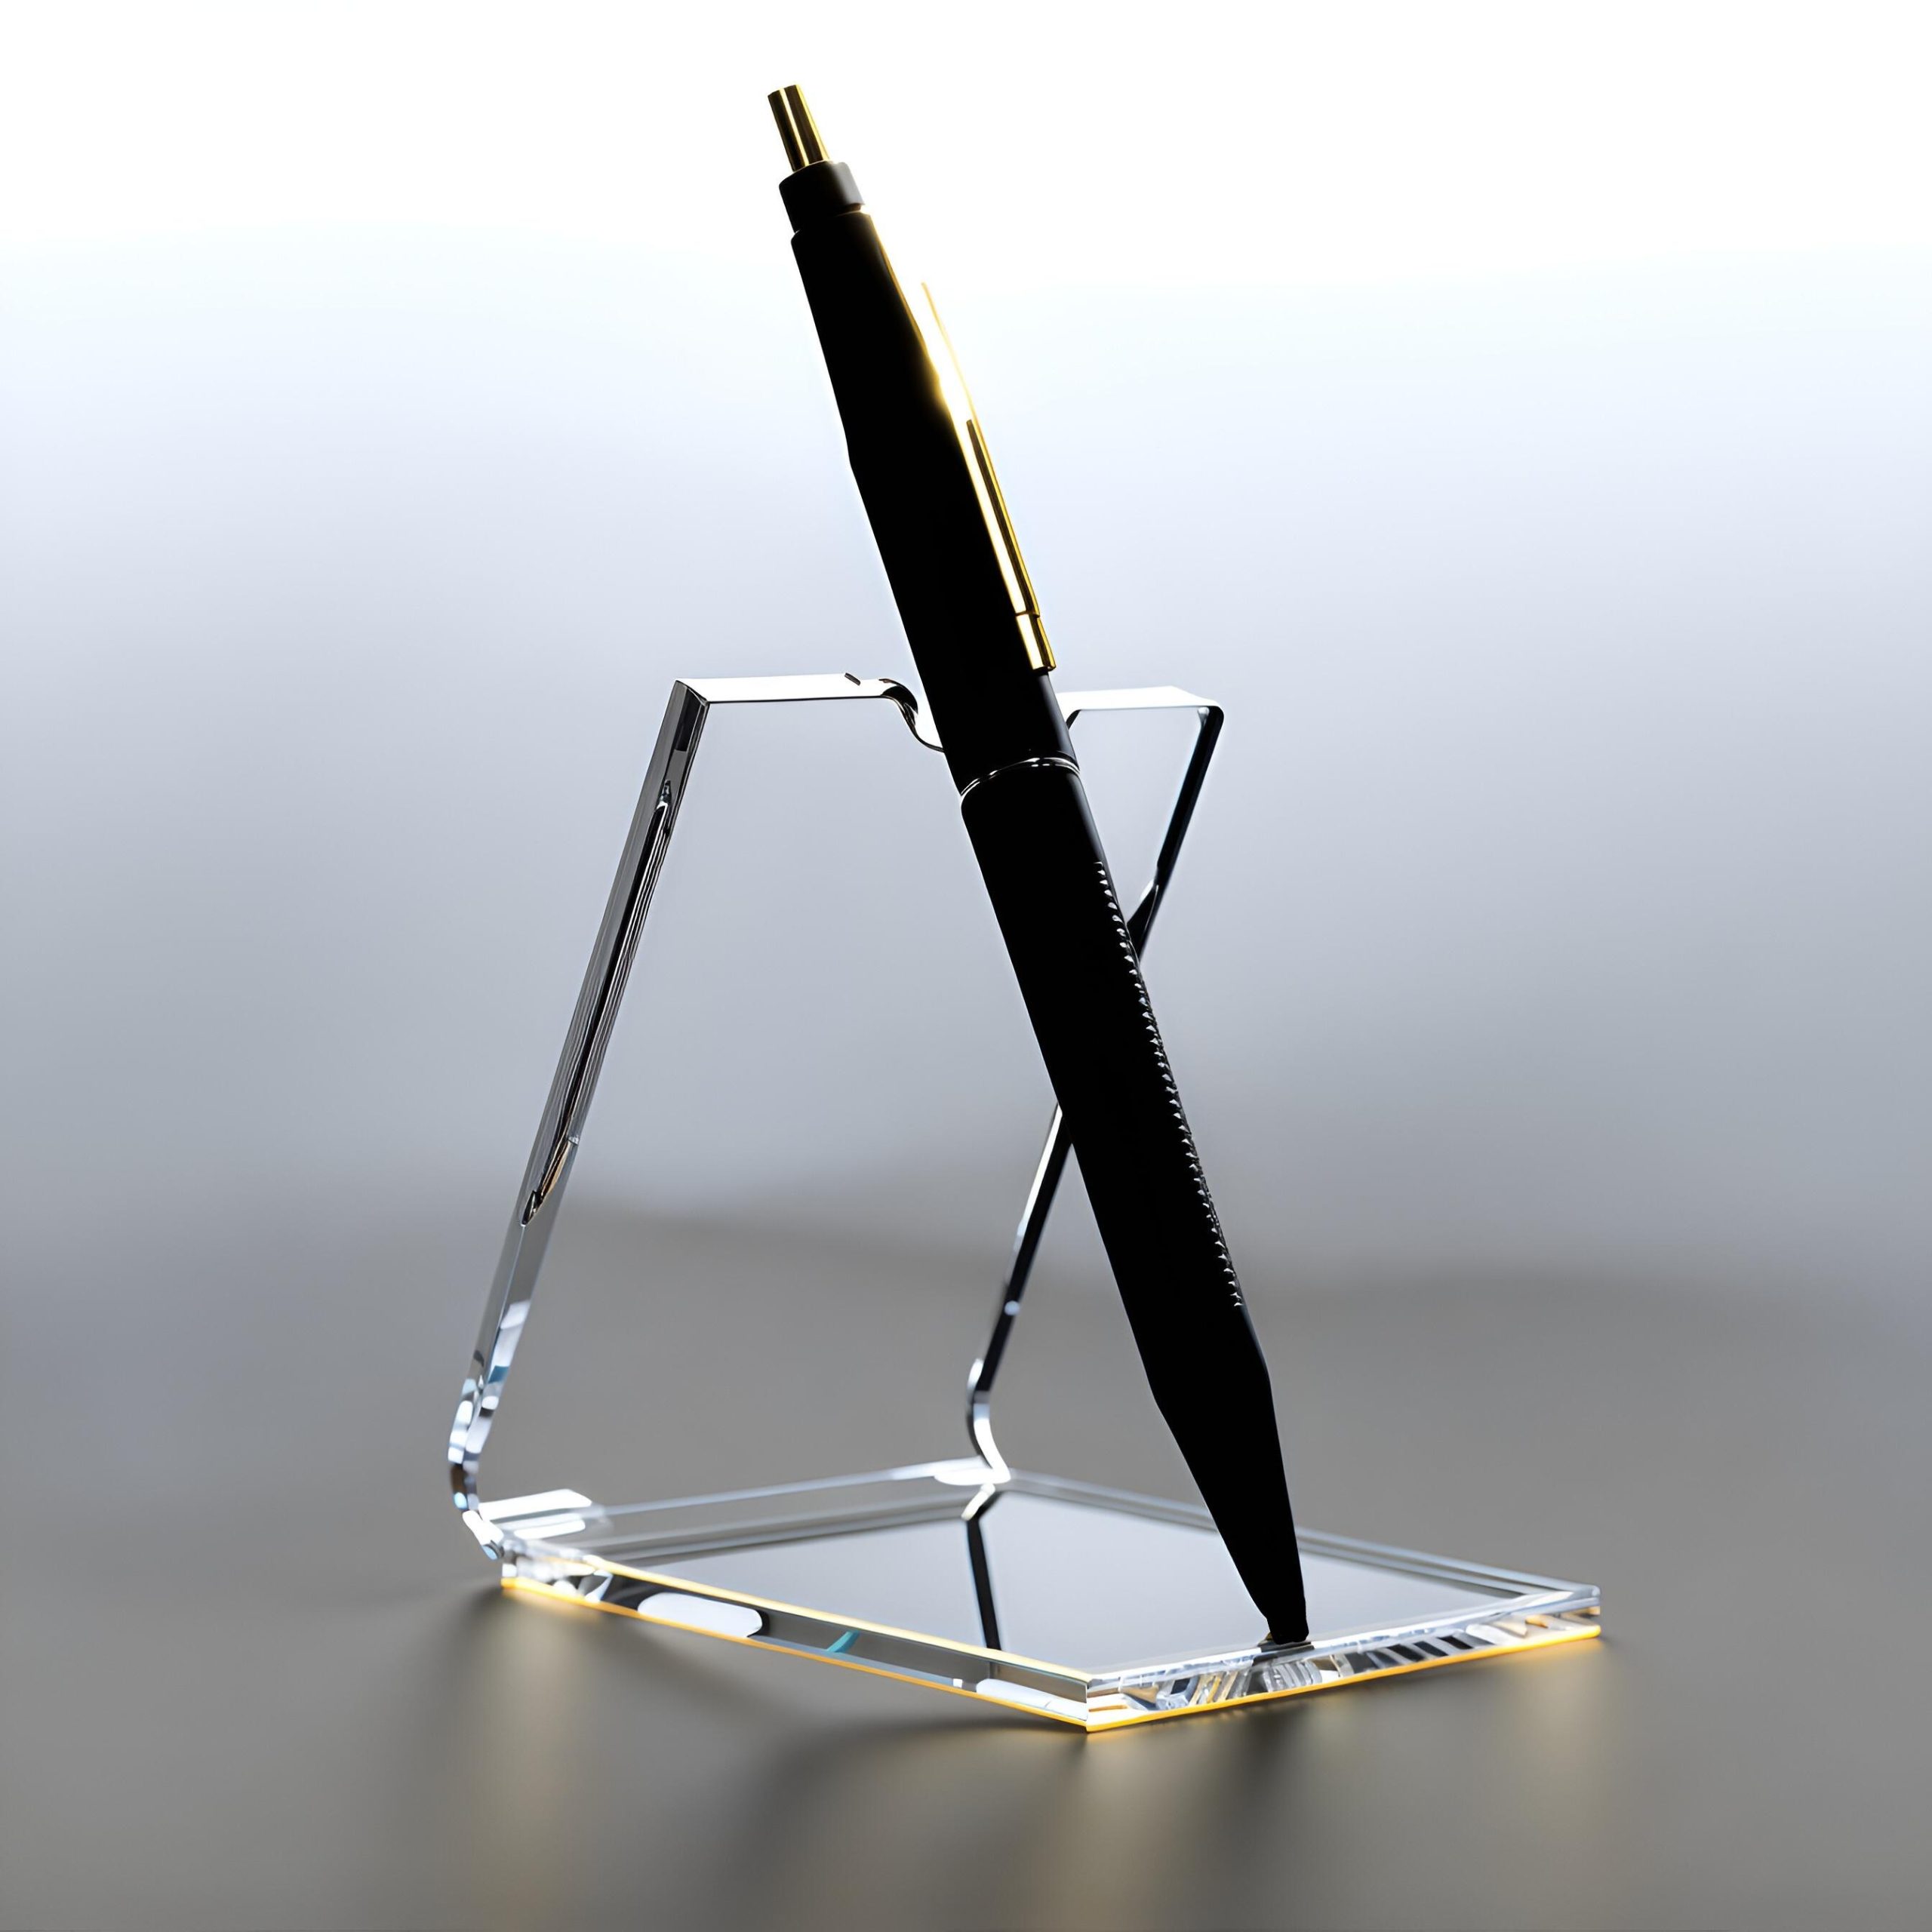 Arched Single Pen Display Stand - Clear